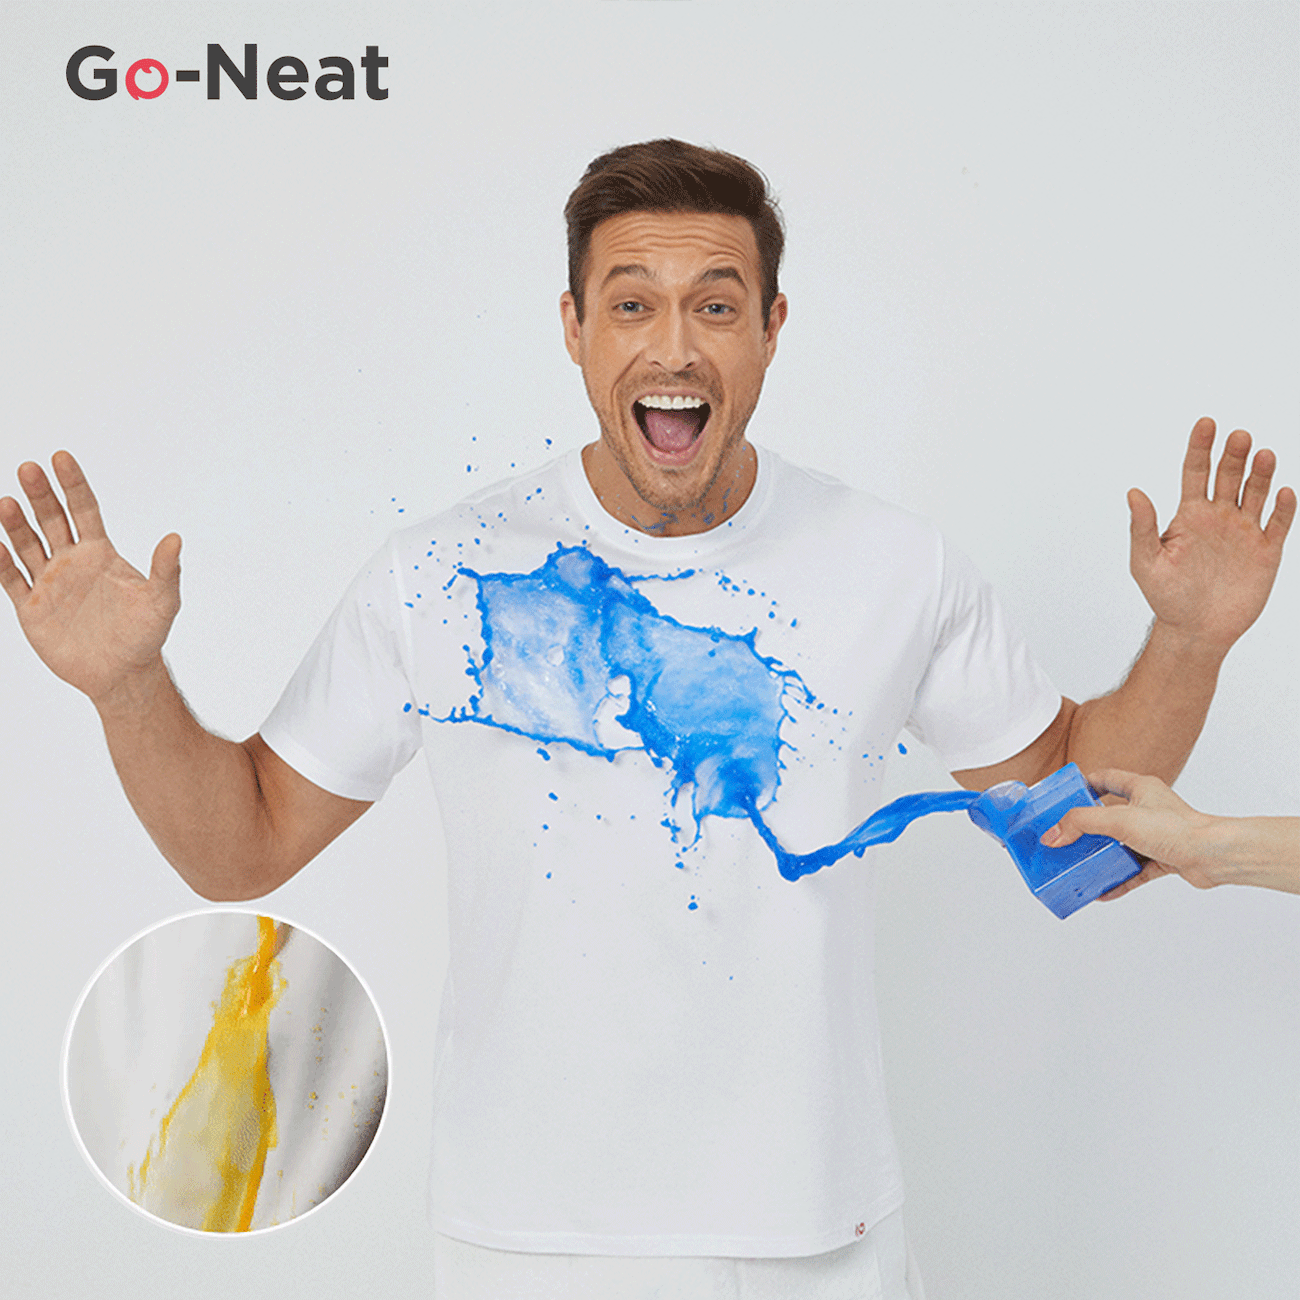 Go-Neat Water Repellent and Stain Resistant T-Shirts for Men White big image 1